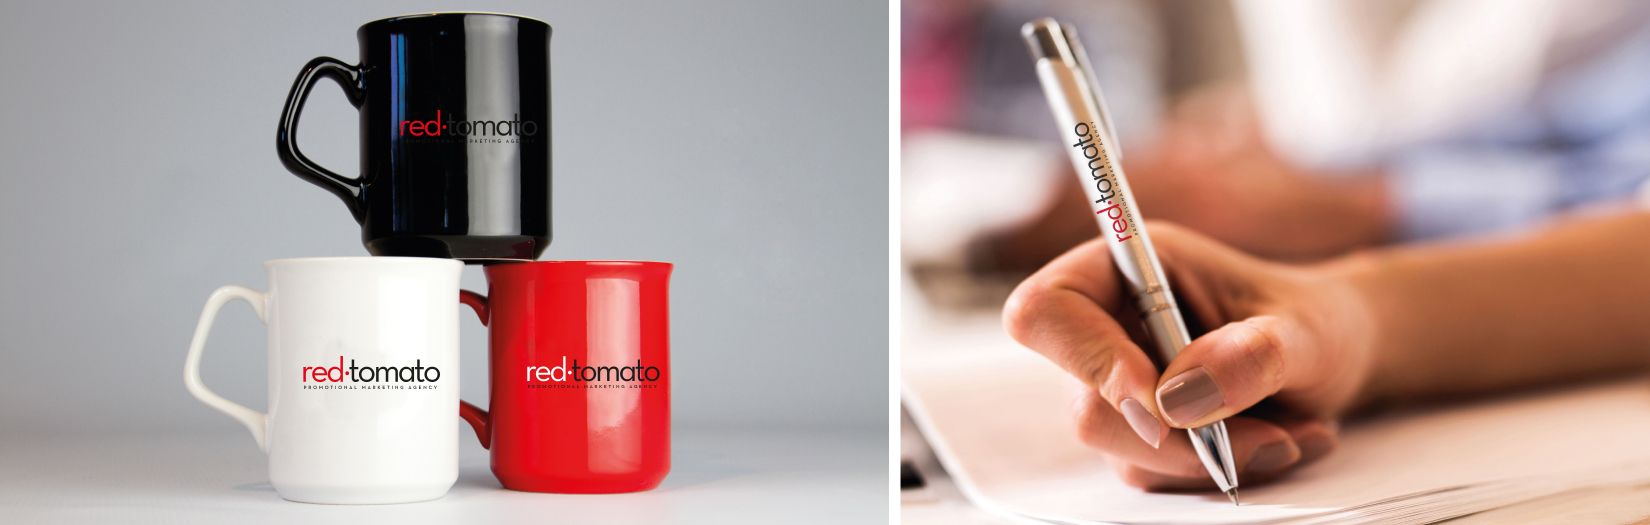 How to Use Promotional Merchandise to Increase Referrals